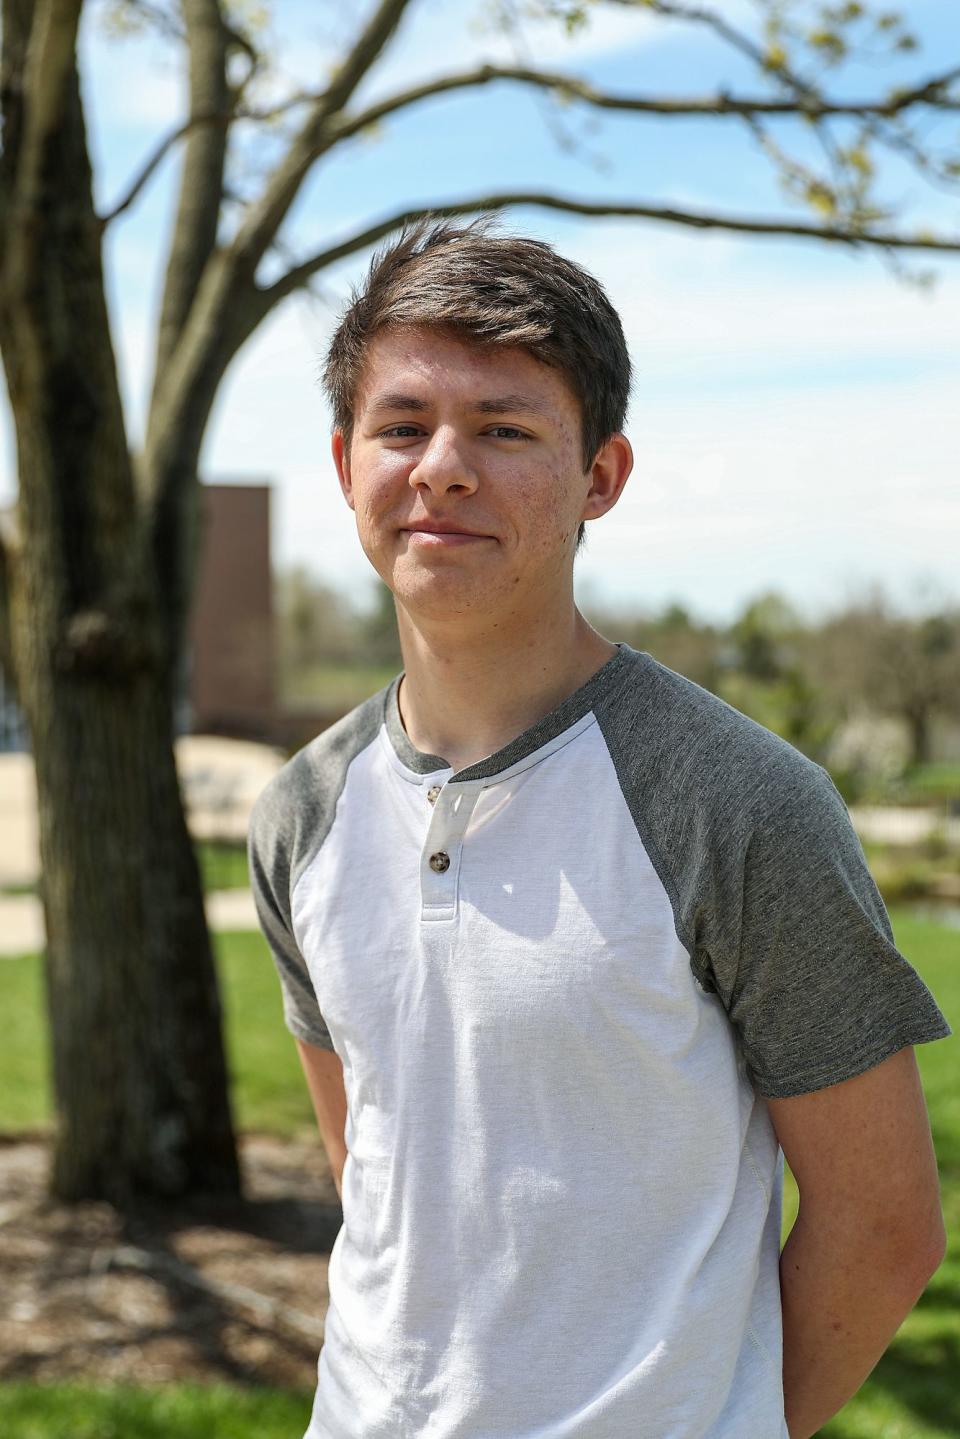 David Chinn, a freshman at Taylor University in Upland, Ind., poses for a picture on campus, Monday, April 22, 2019. Since the announcement that Vice President Mike Pence will speak at commencement in May, students, faculty,  alumni and surrounding residents have publicly responded with  strong mixed opinions. "Even just between people that don't really take a side on this issue, they're really disheartened and upset by how much conflict and division is on campus," Chinn said.